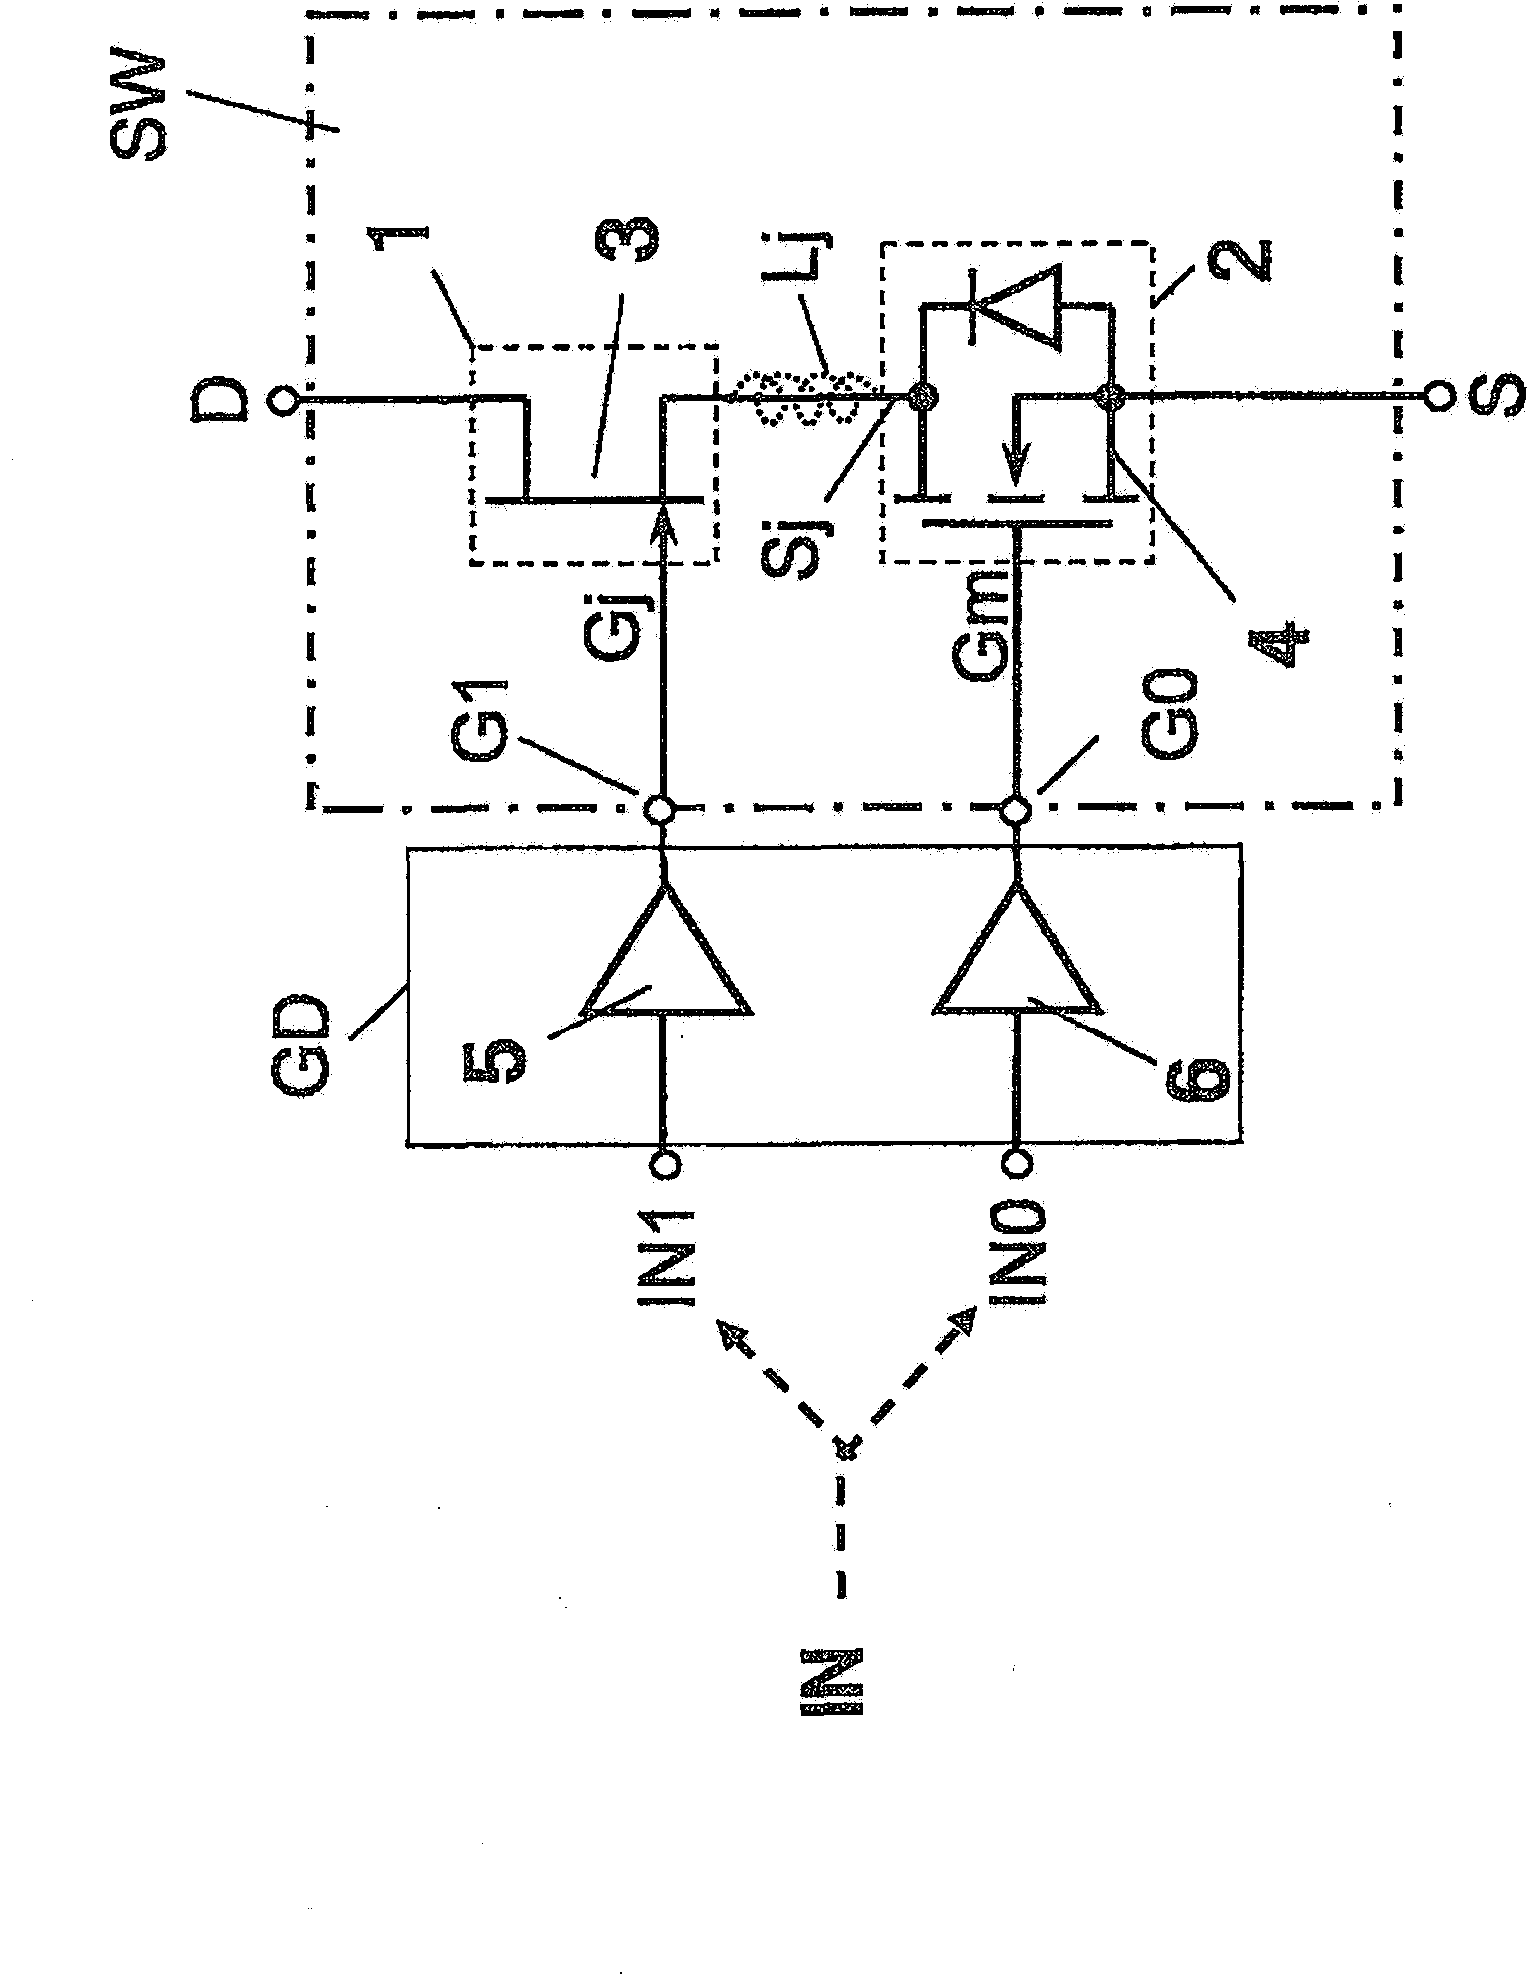 Semiconductor device and system using same